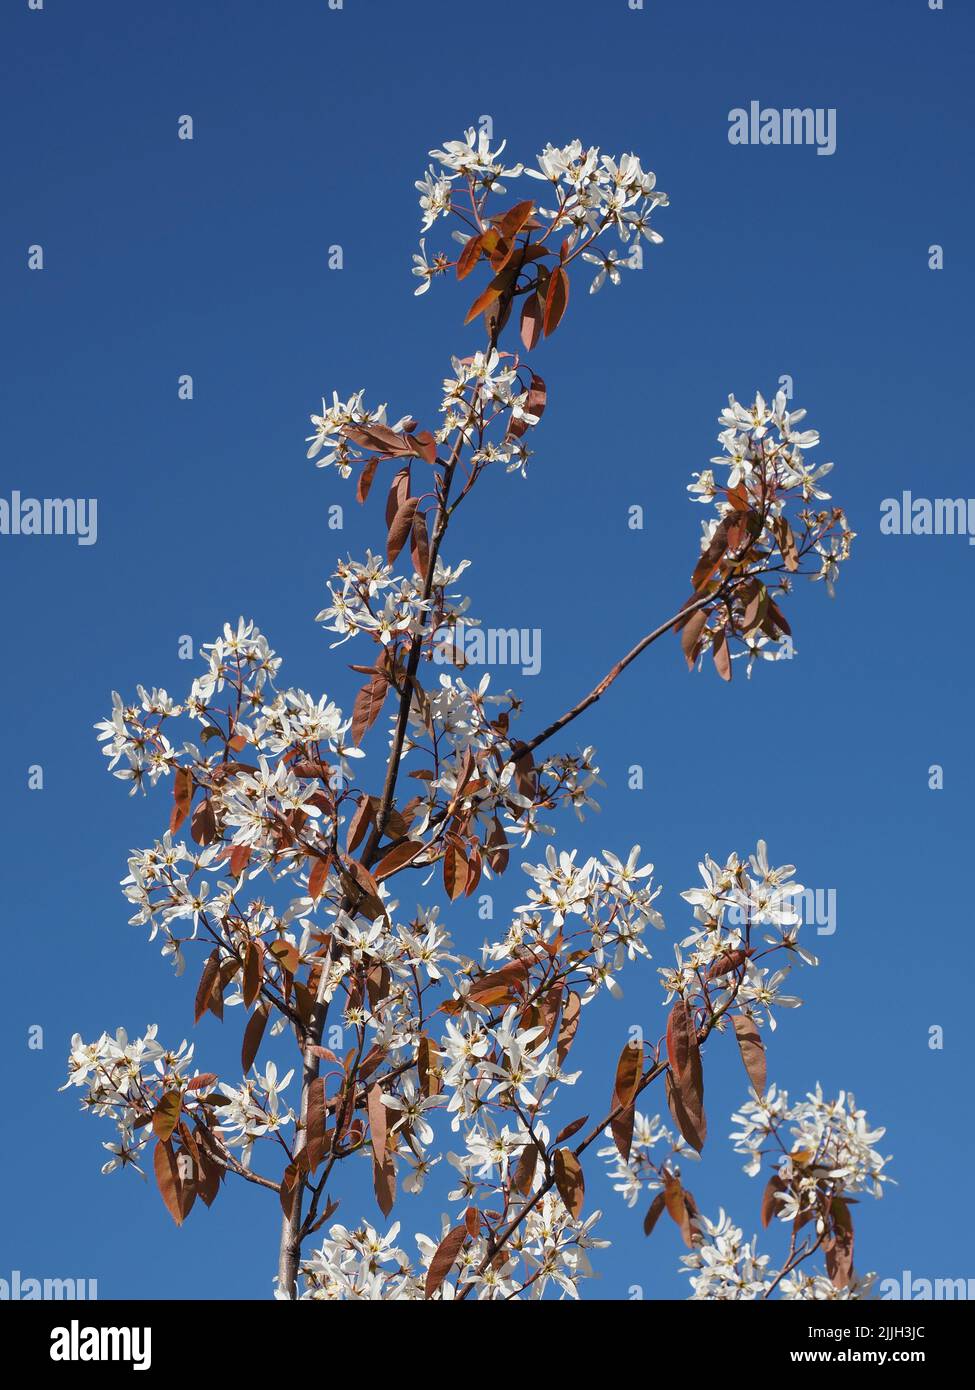 Close up of the white blossom & bronze coloured leaves on a Amelanchier Lamarckii, snowy mespilus, shadbush, small tree, against a cloudless blue sky. Stock Photo